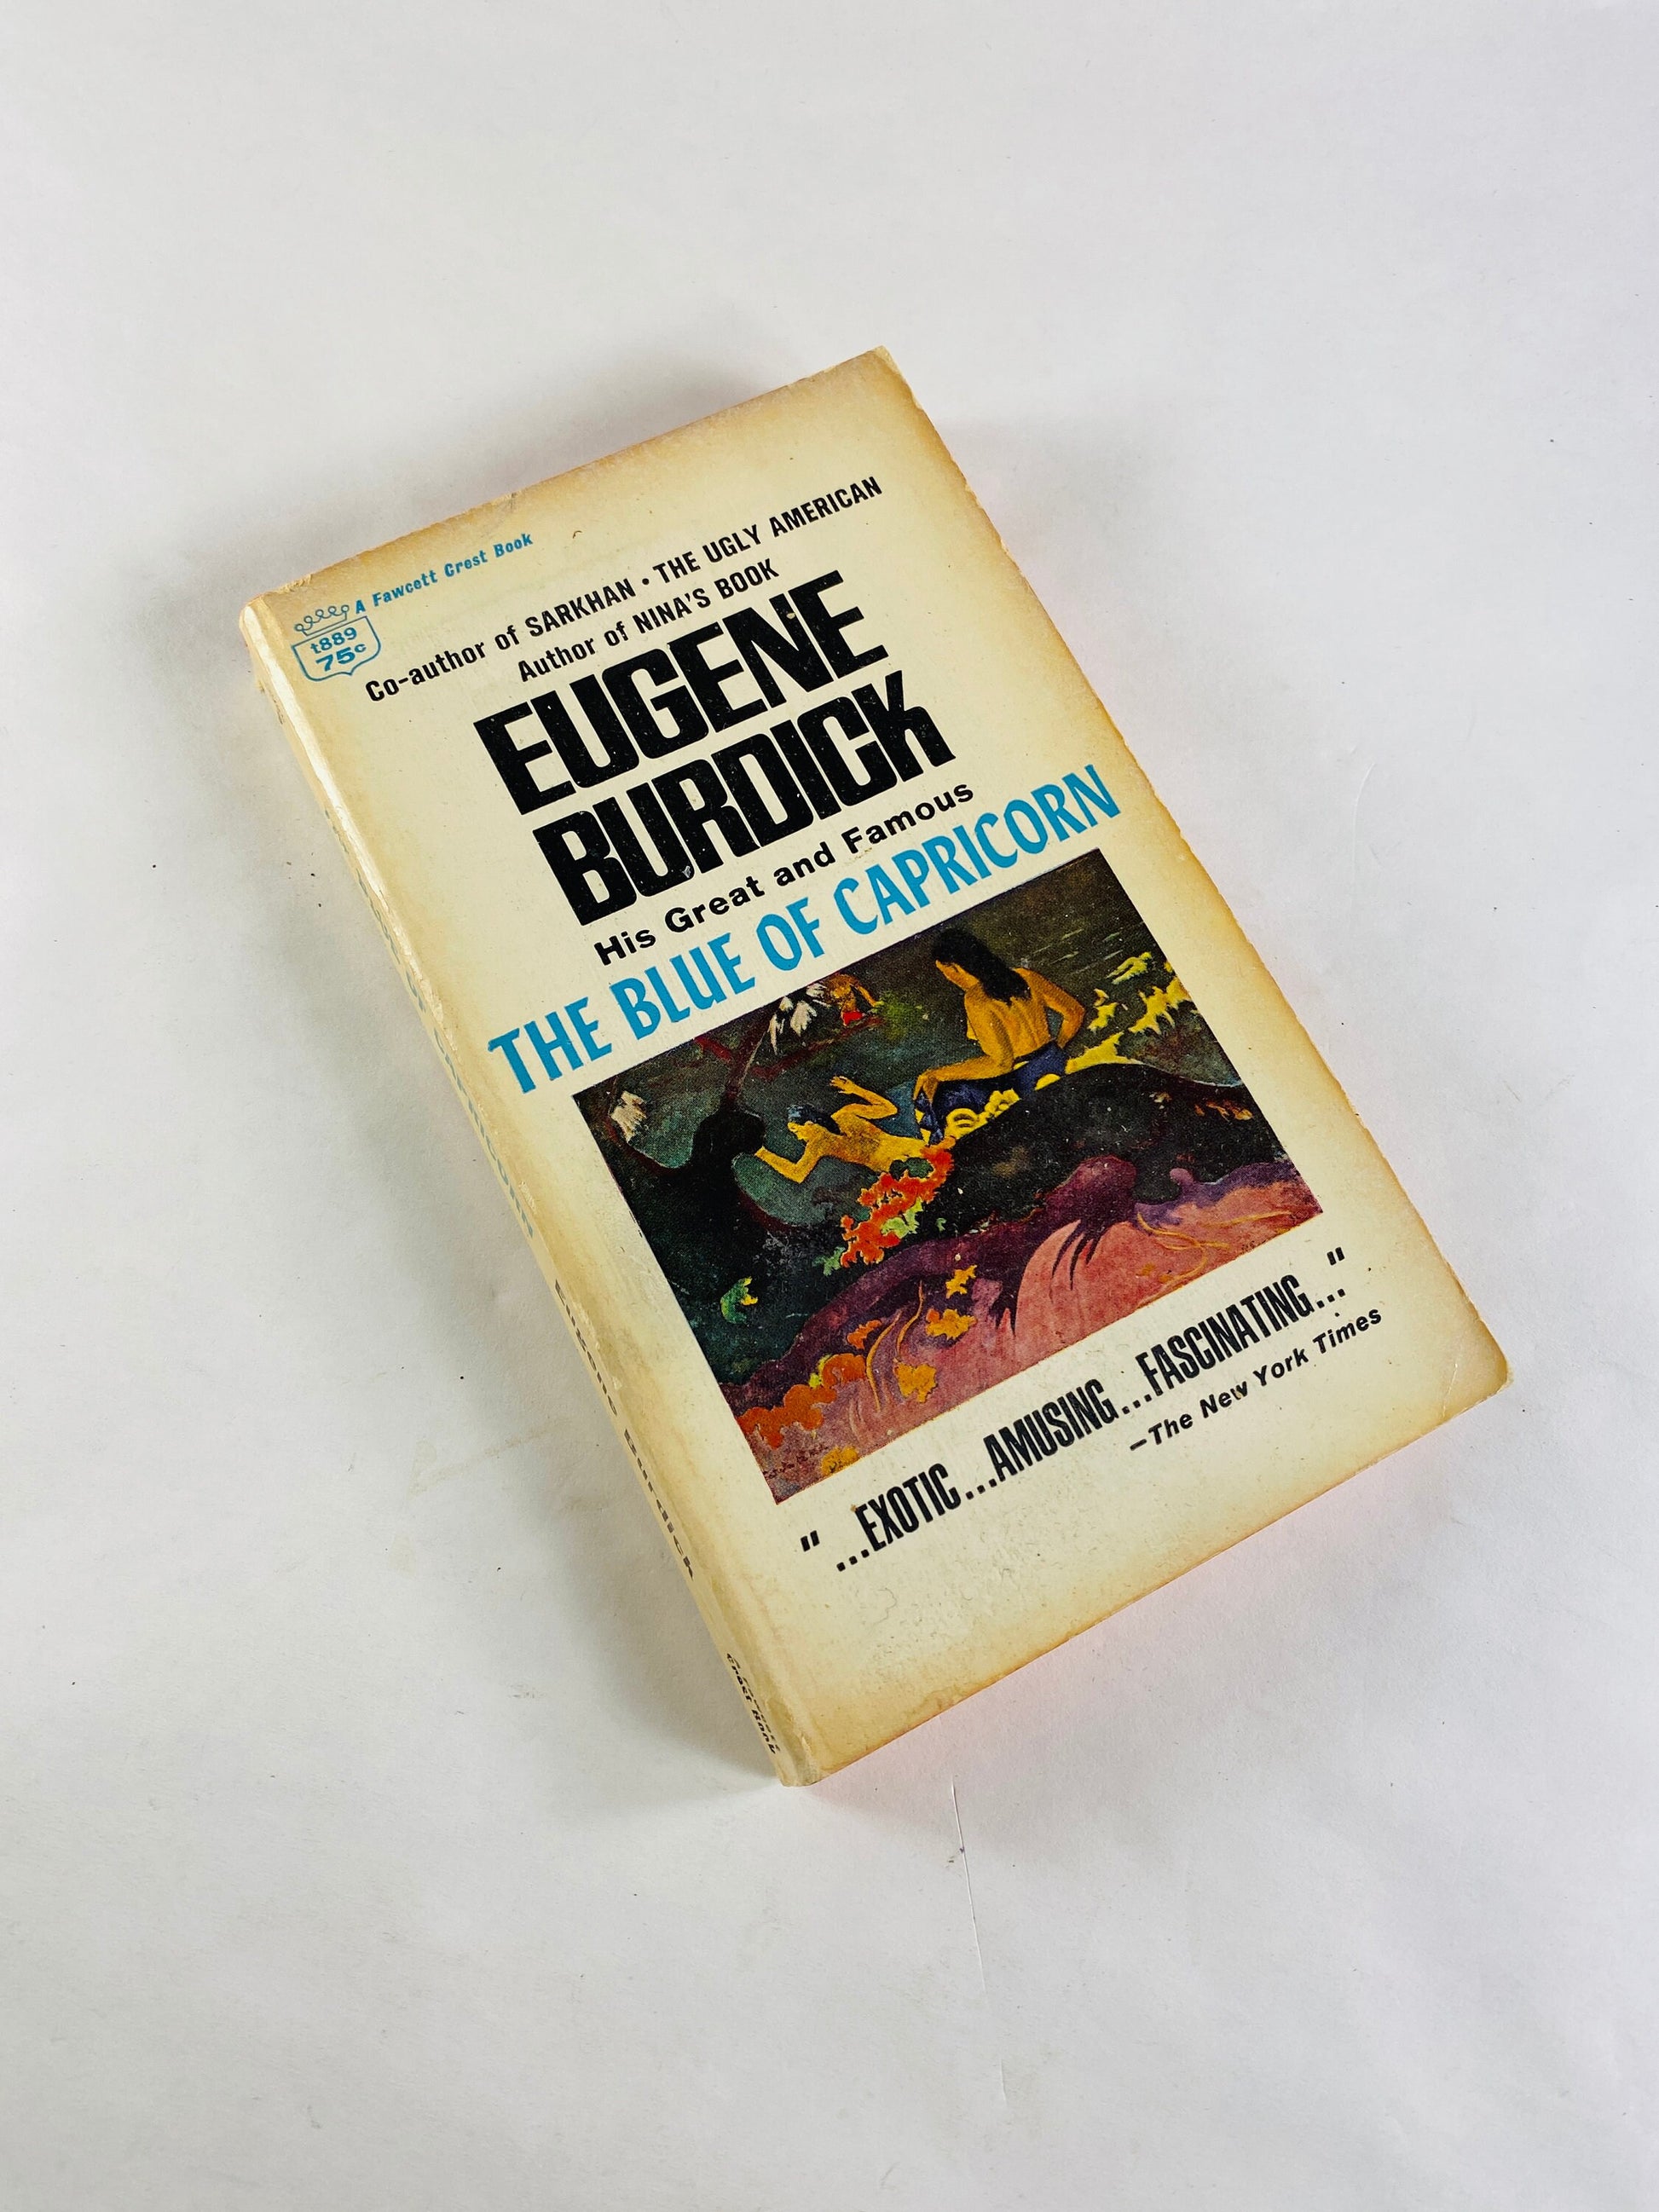 Blue of Capricorn vintage paperback book by Eugene Burdick circa 1961 stories of men of all races who fought and loved in ocean's reflection